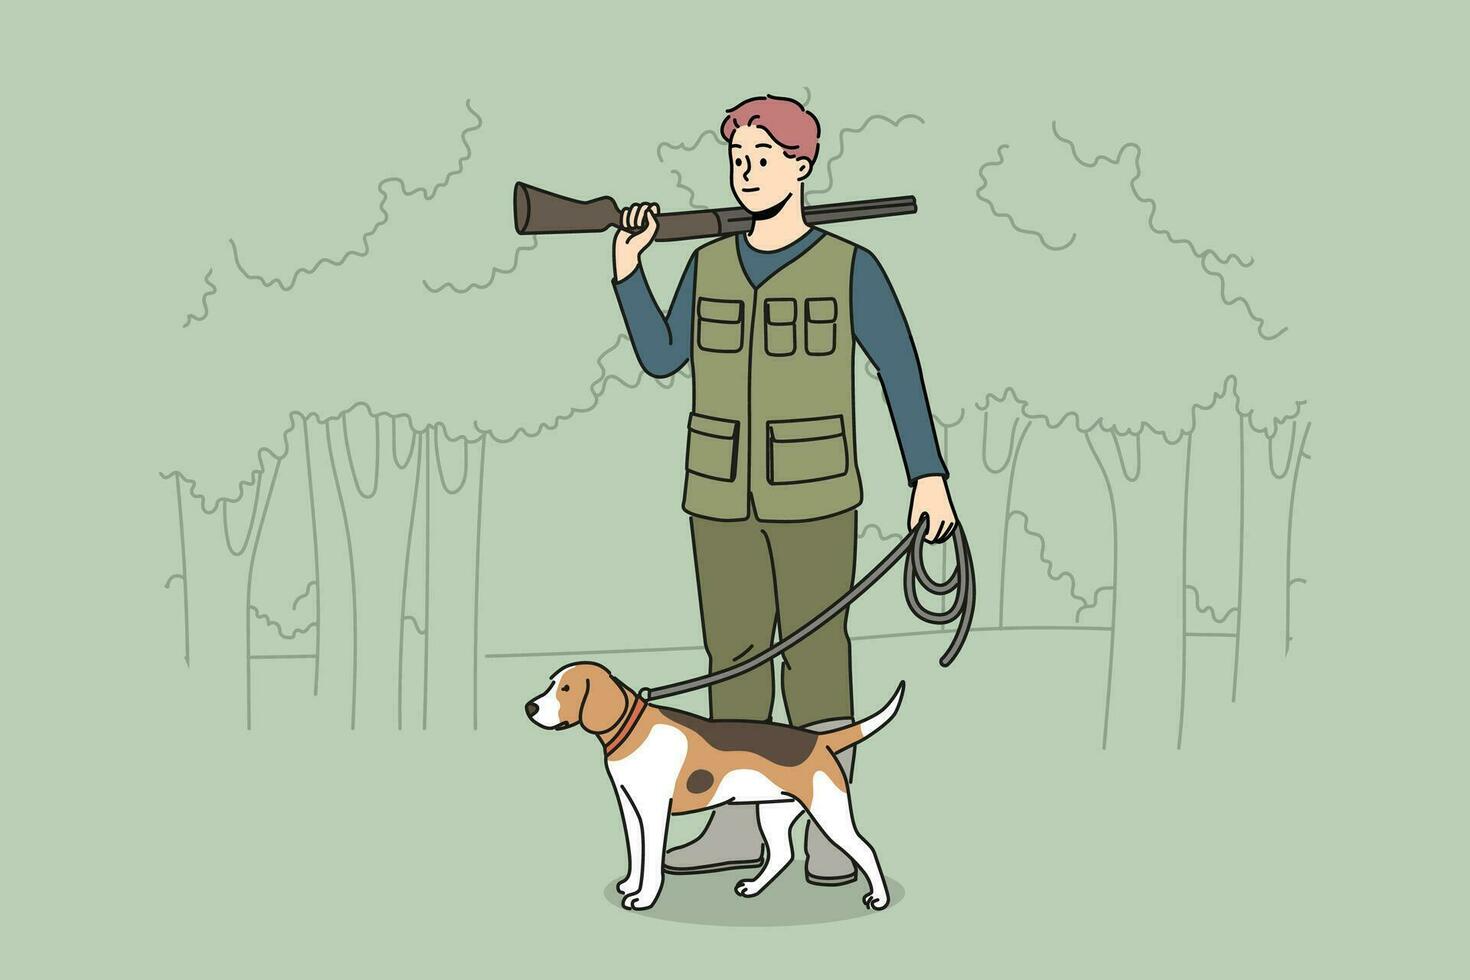 Male hunter in khaki uniform with dog on leash in forest. Man hunting with canine in wild nature. Vector illustration.